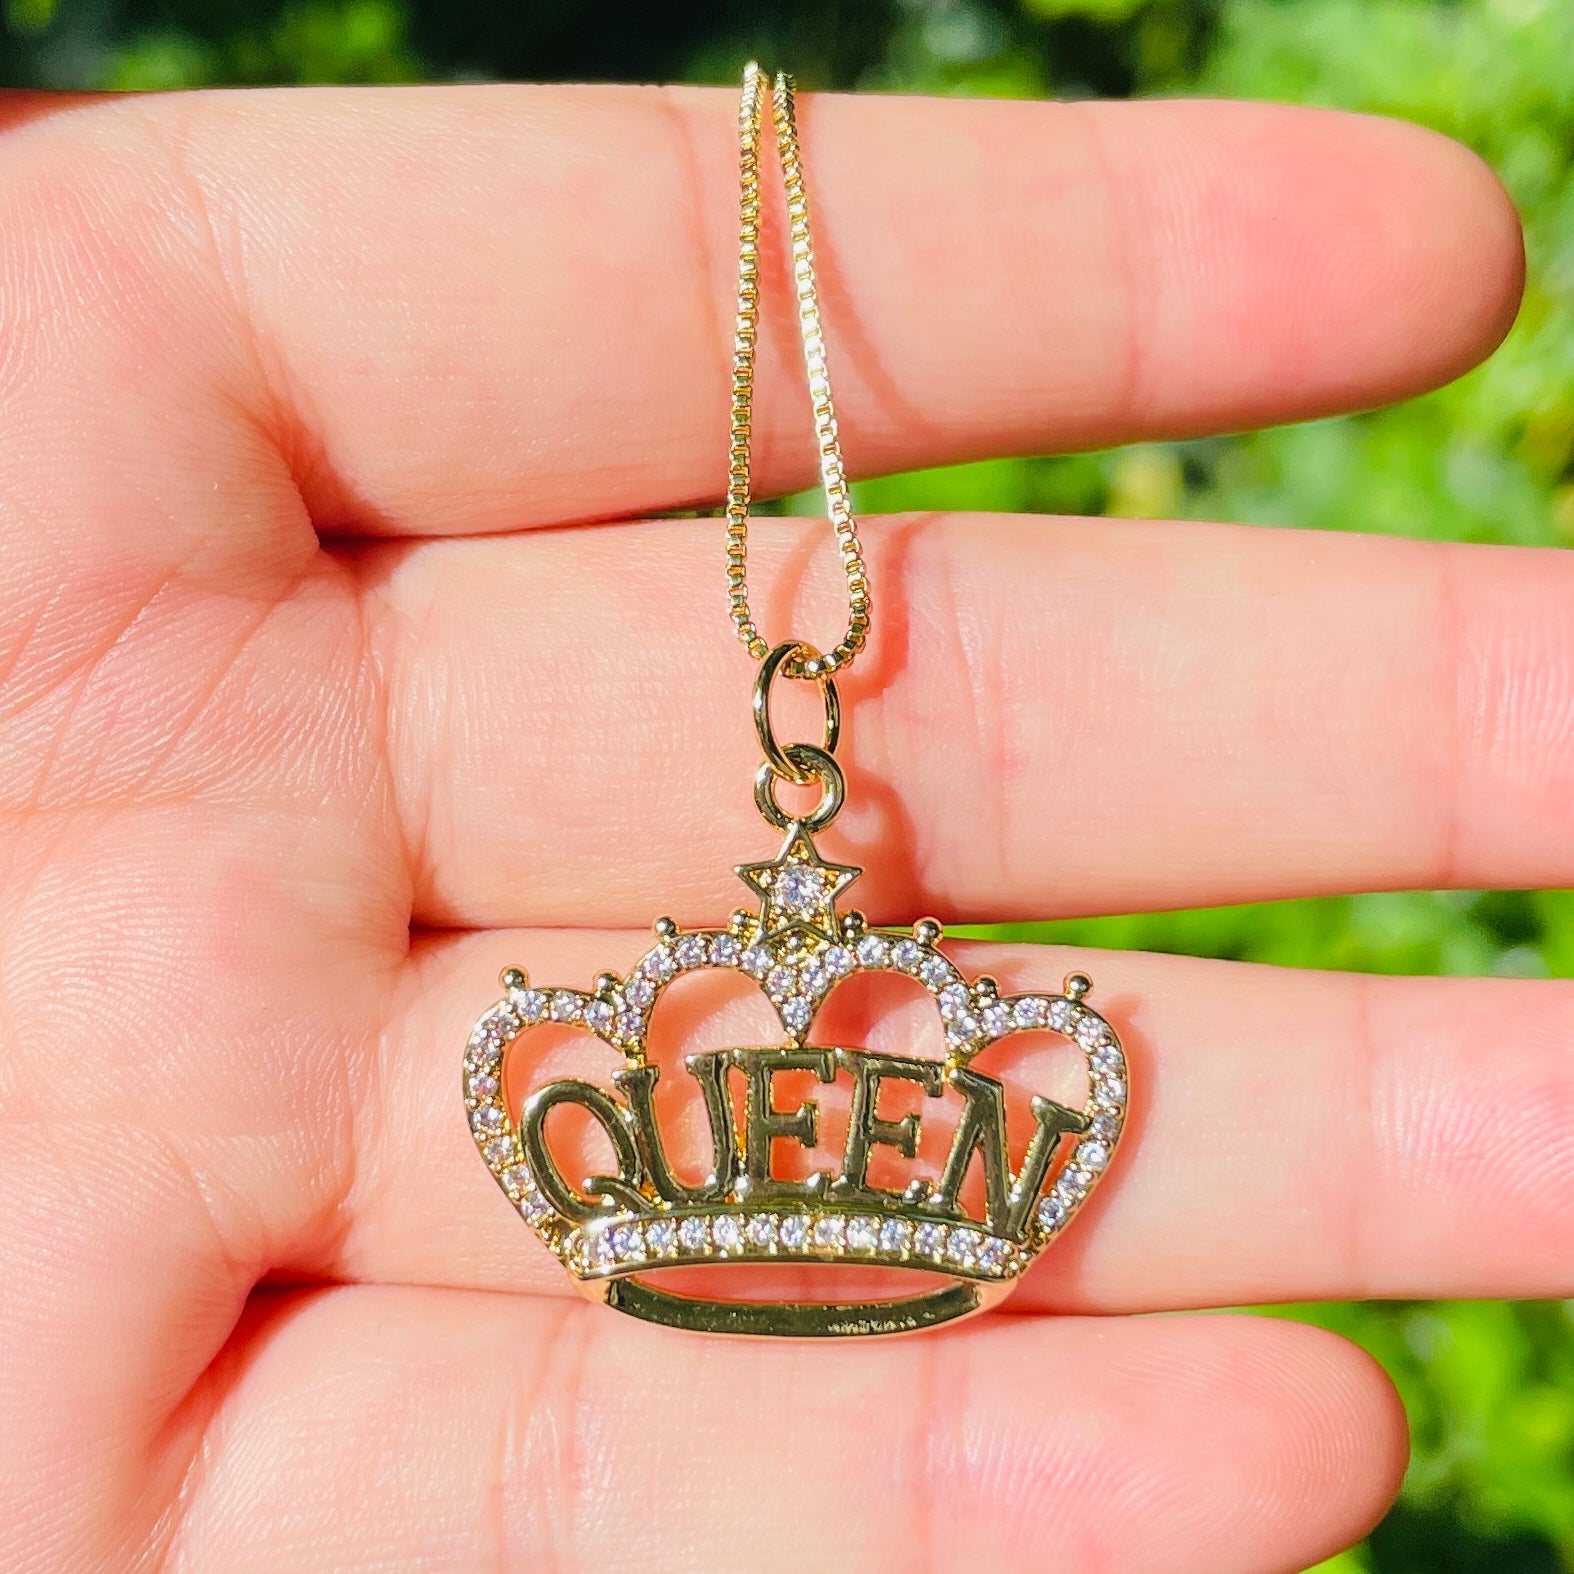 5pcs/lot 18/20inch Box Chain CZ Pave Crown Queen Neckalce Gold Necklaces Charms Beads Beyond